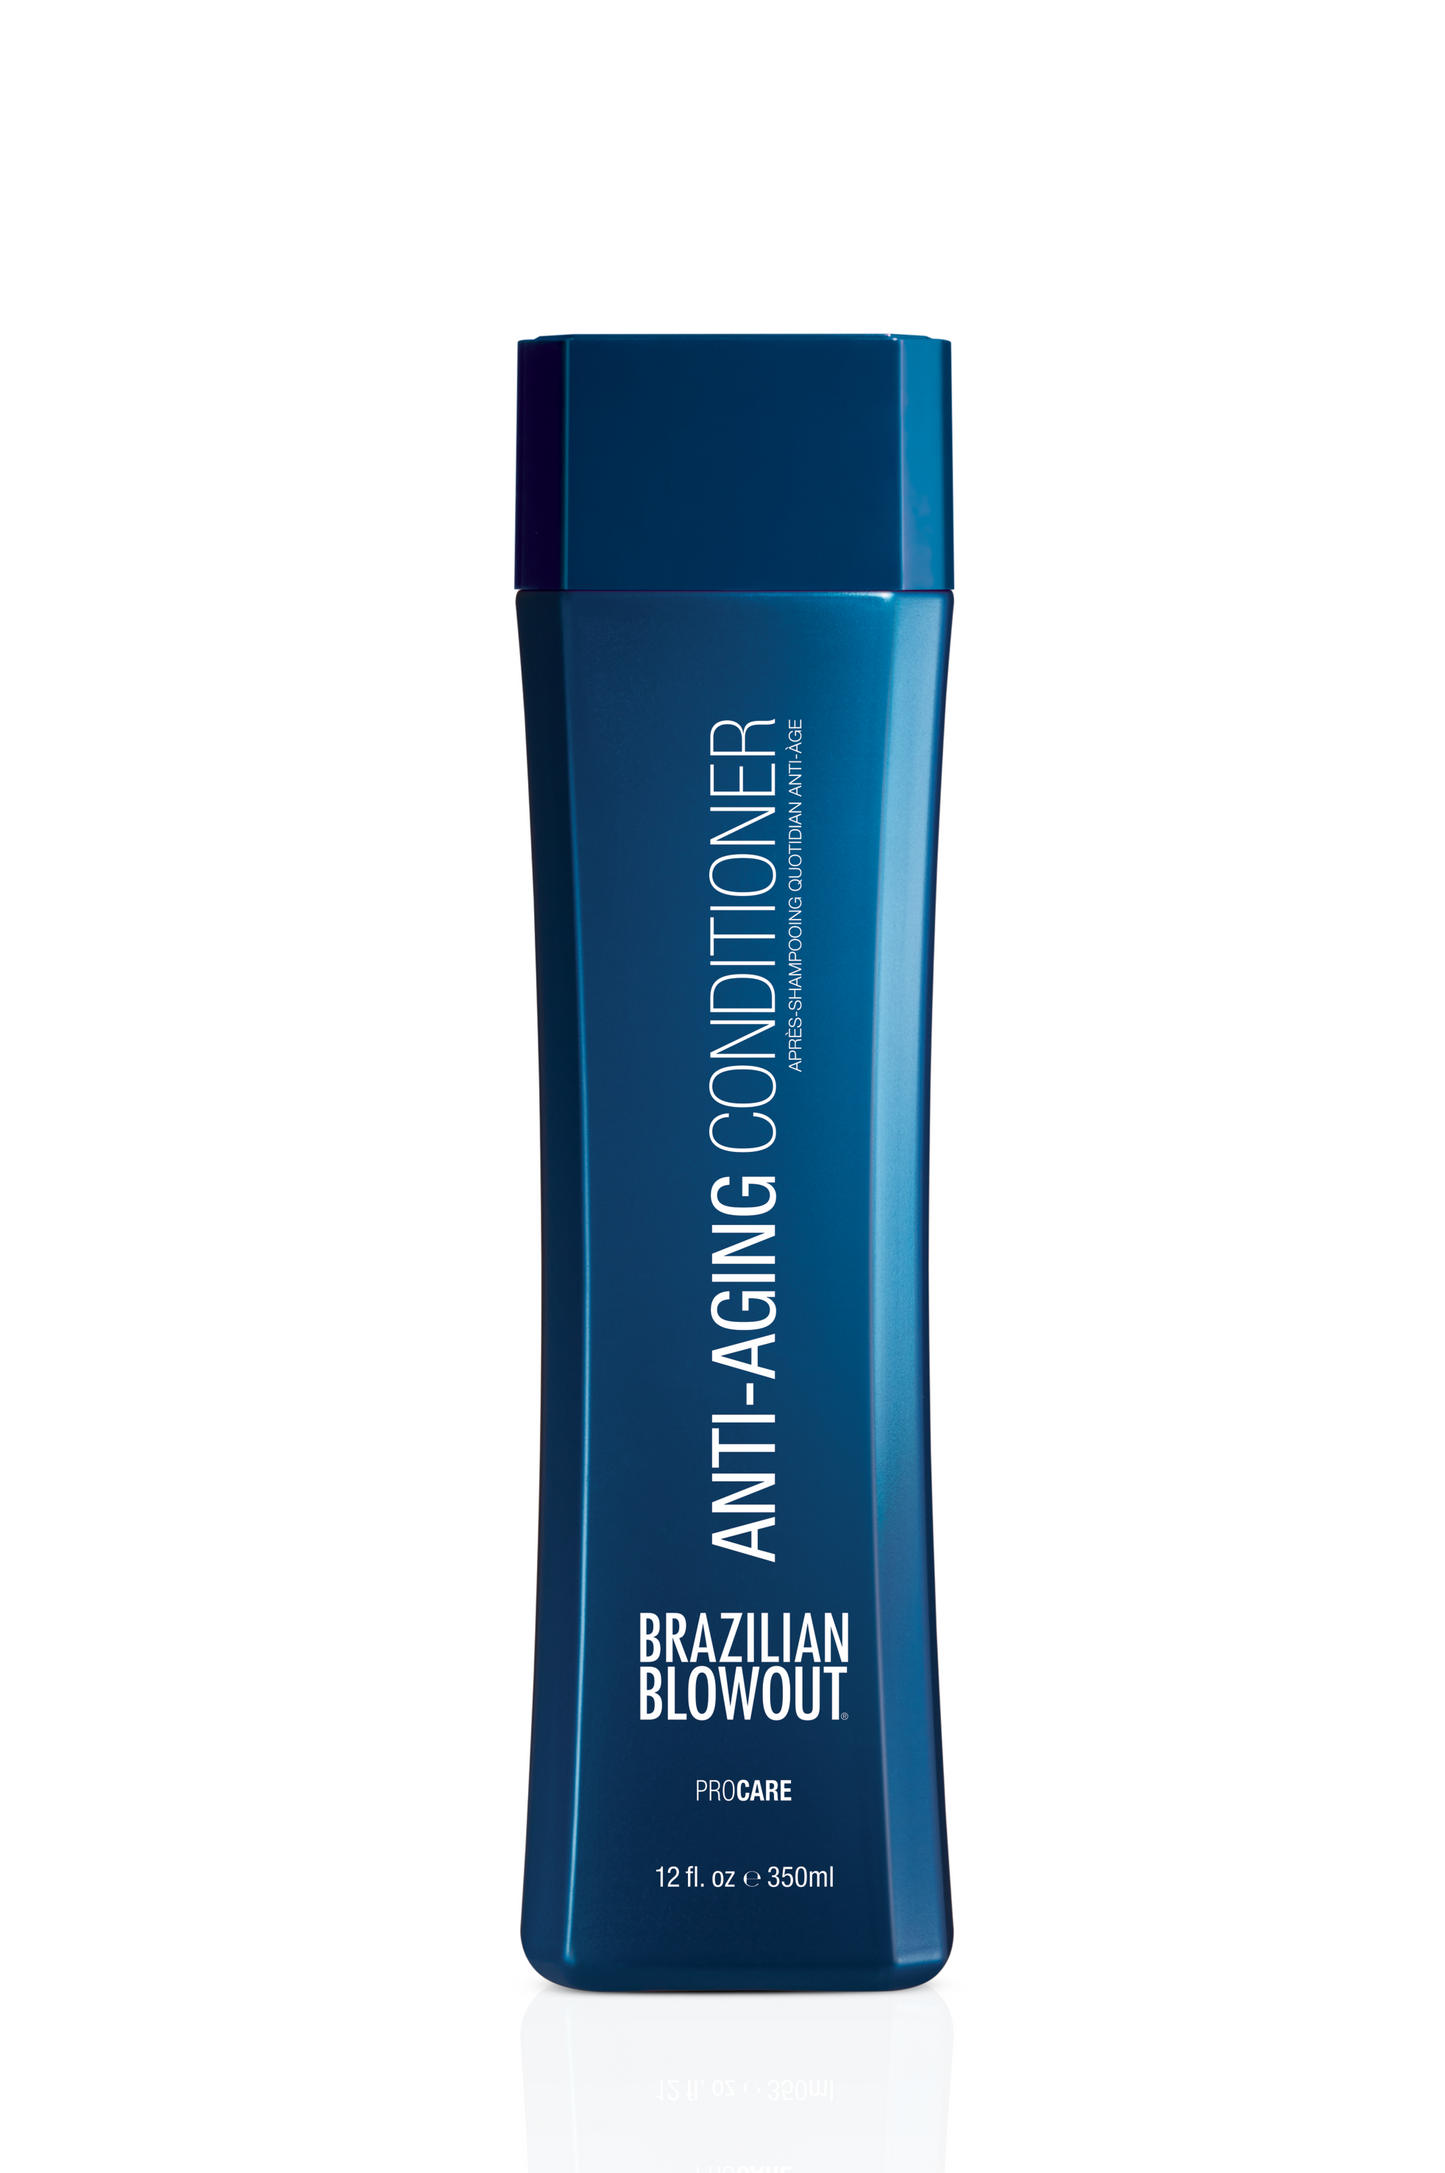 Brazilian Blowout Anti Ageing Conditioner